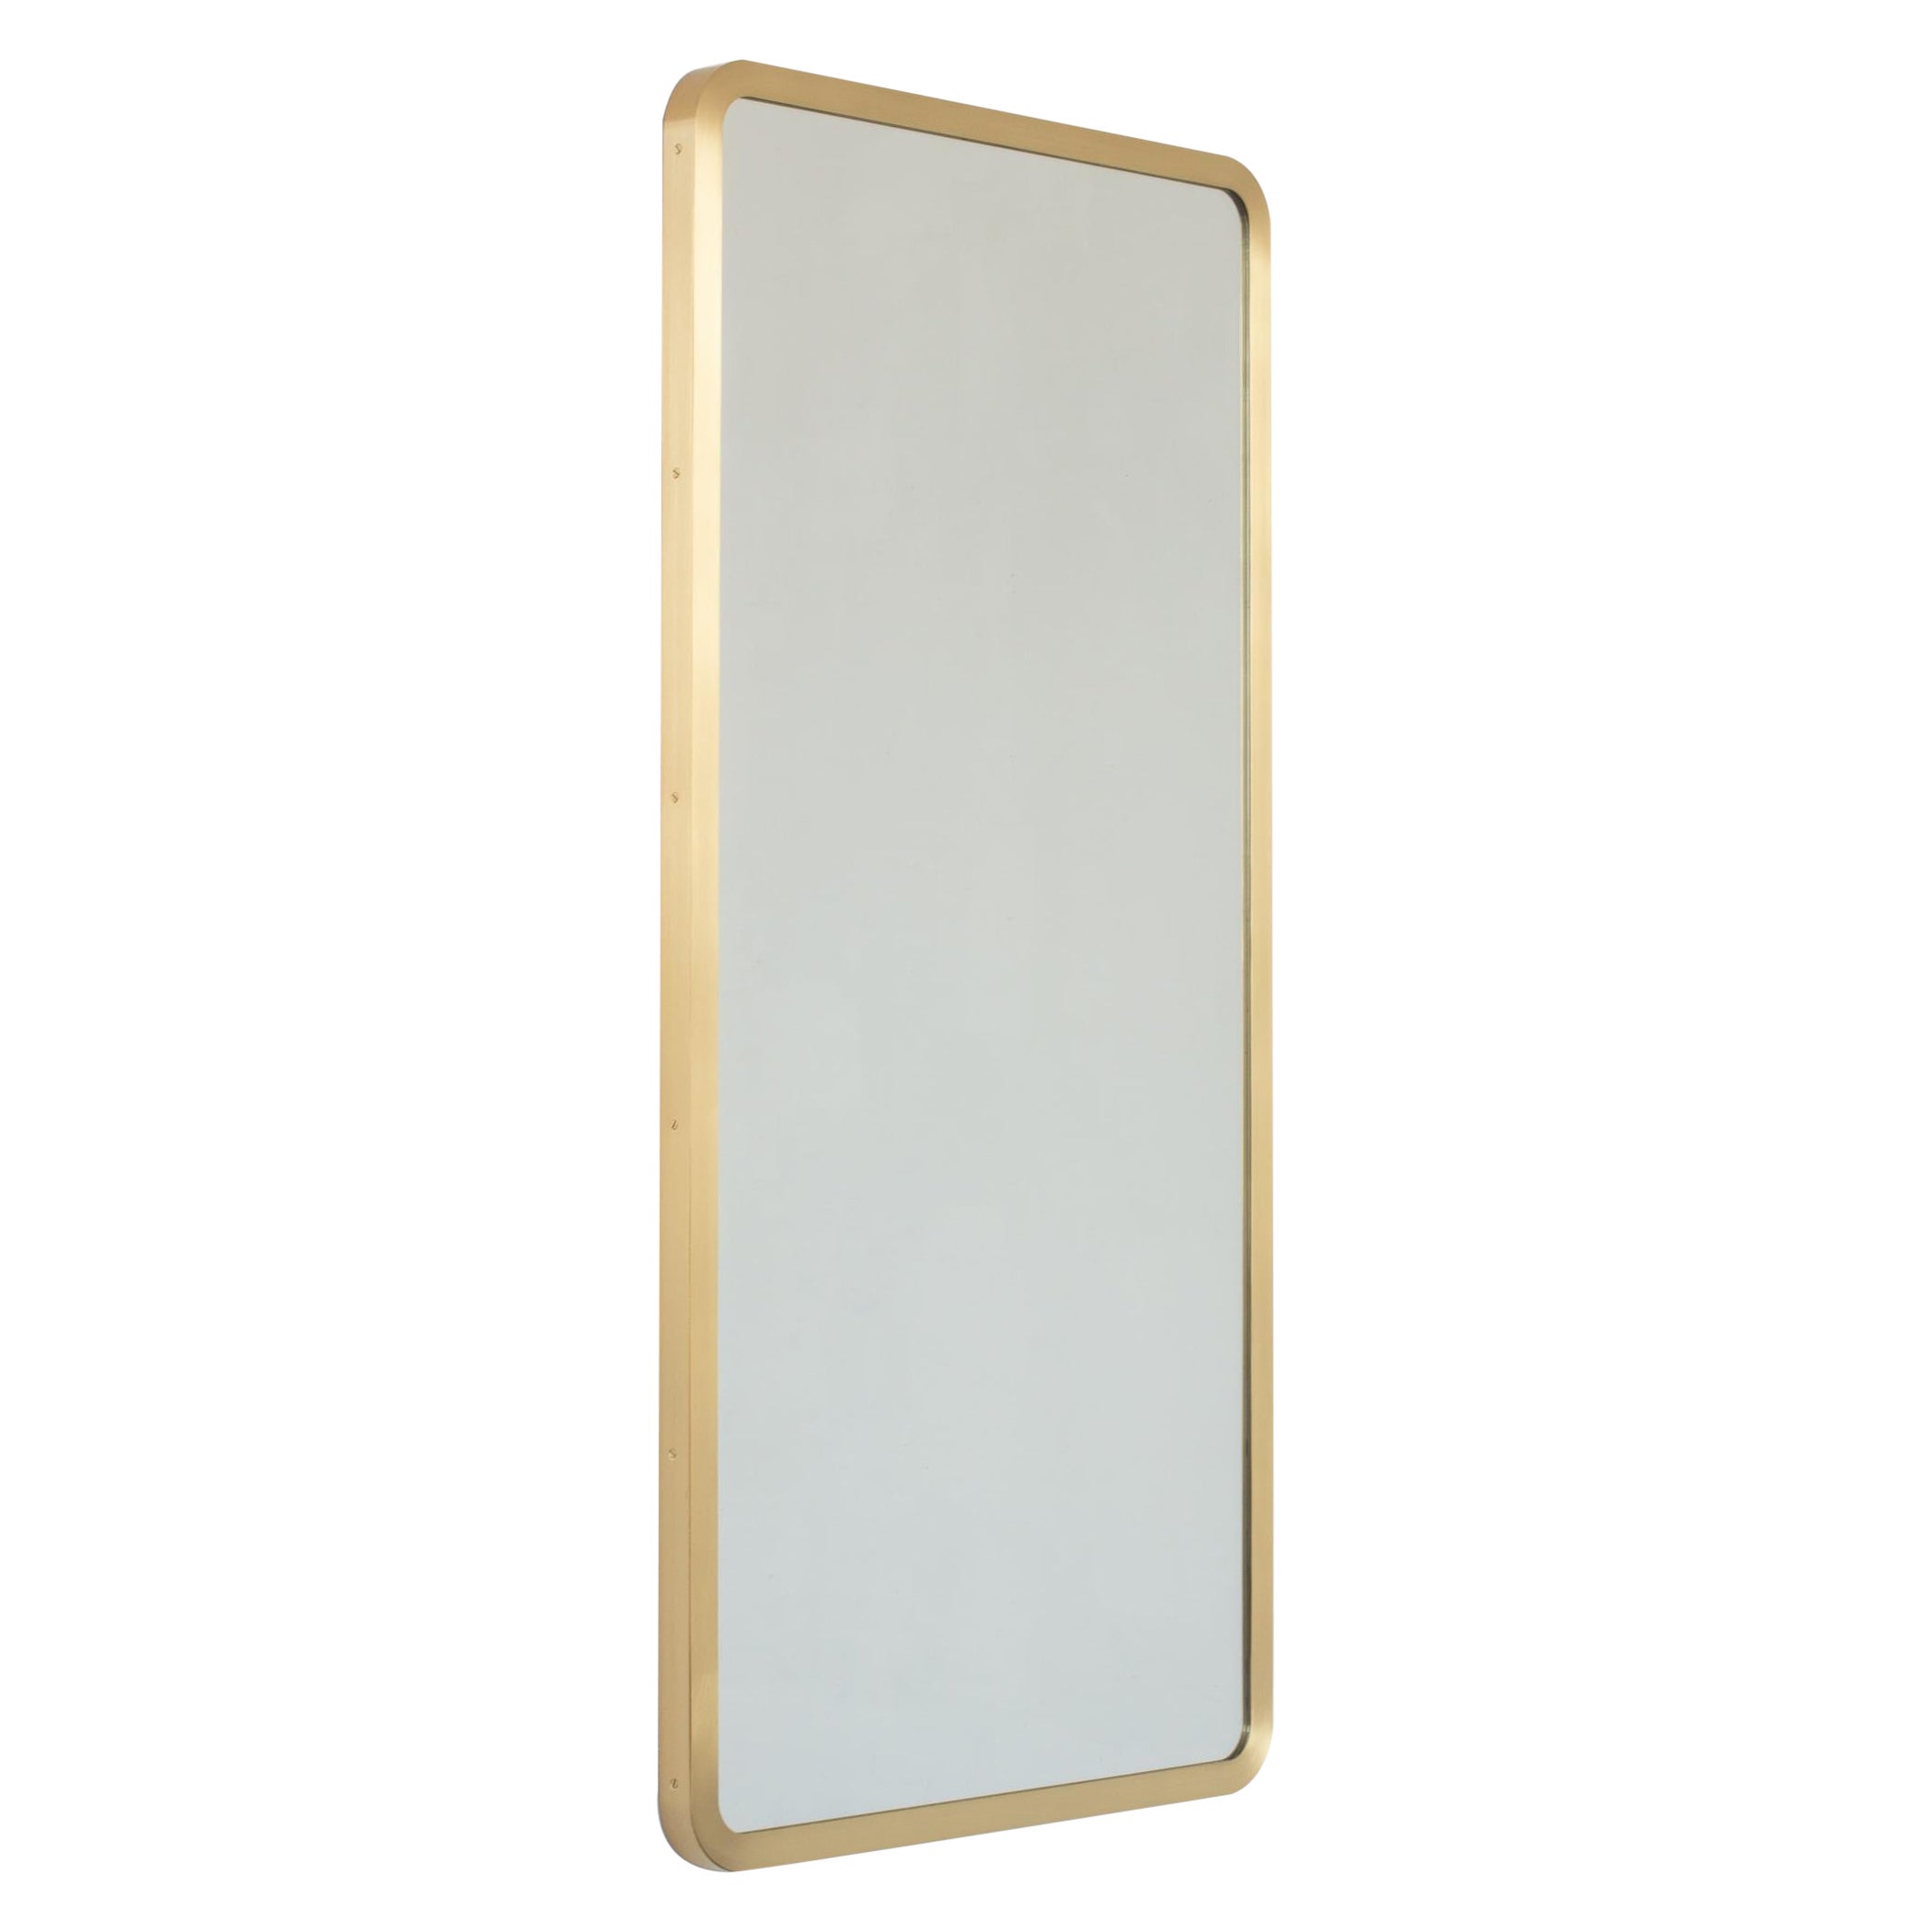 Quadris Rectangular Modern Mirror with a Brass Full Front Frame, Small